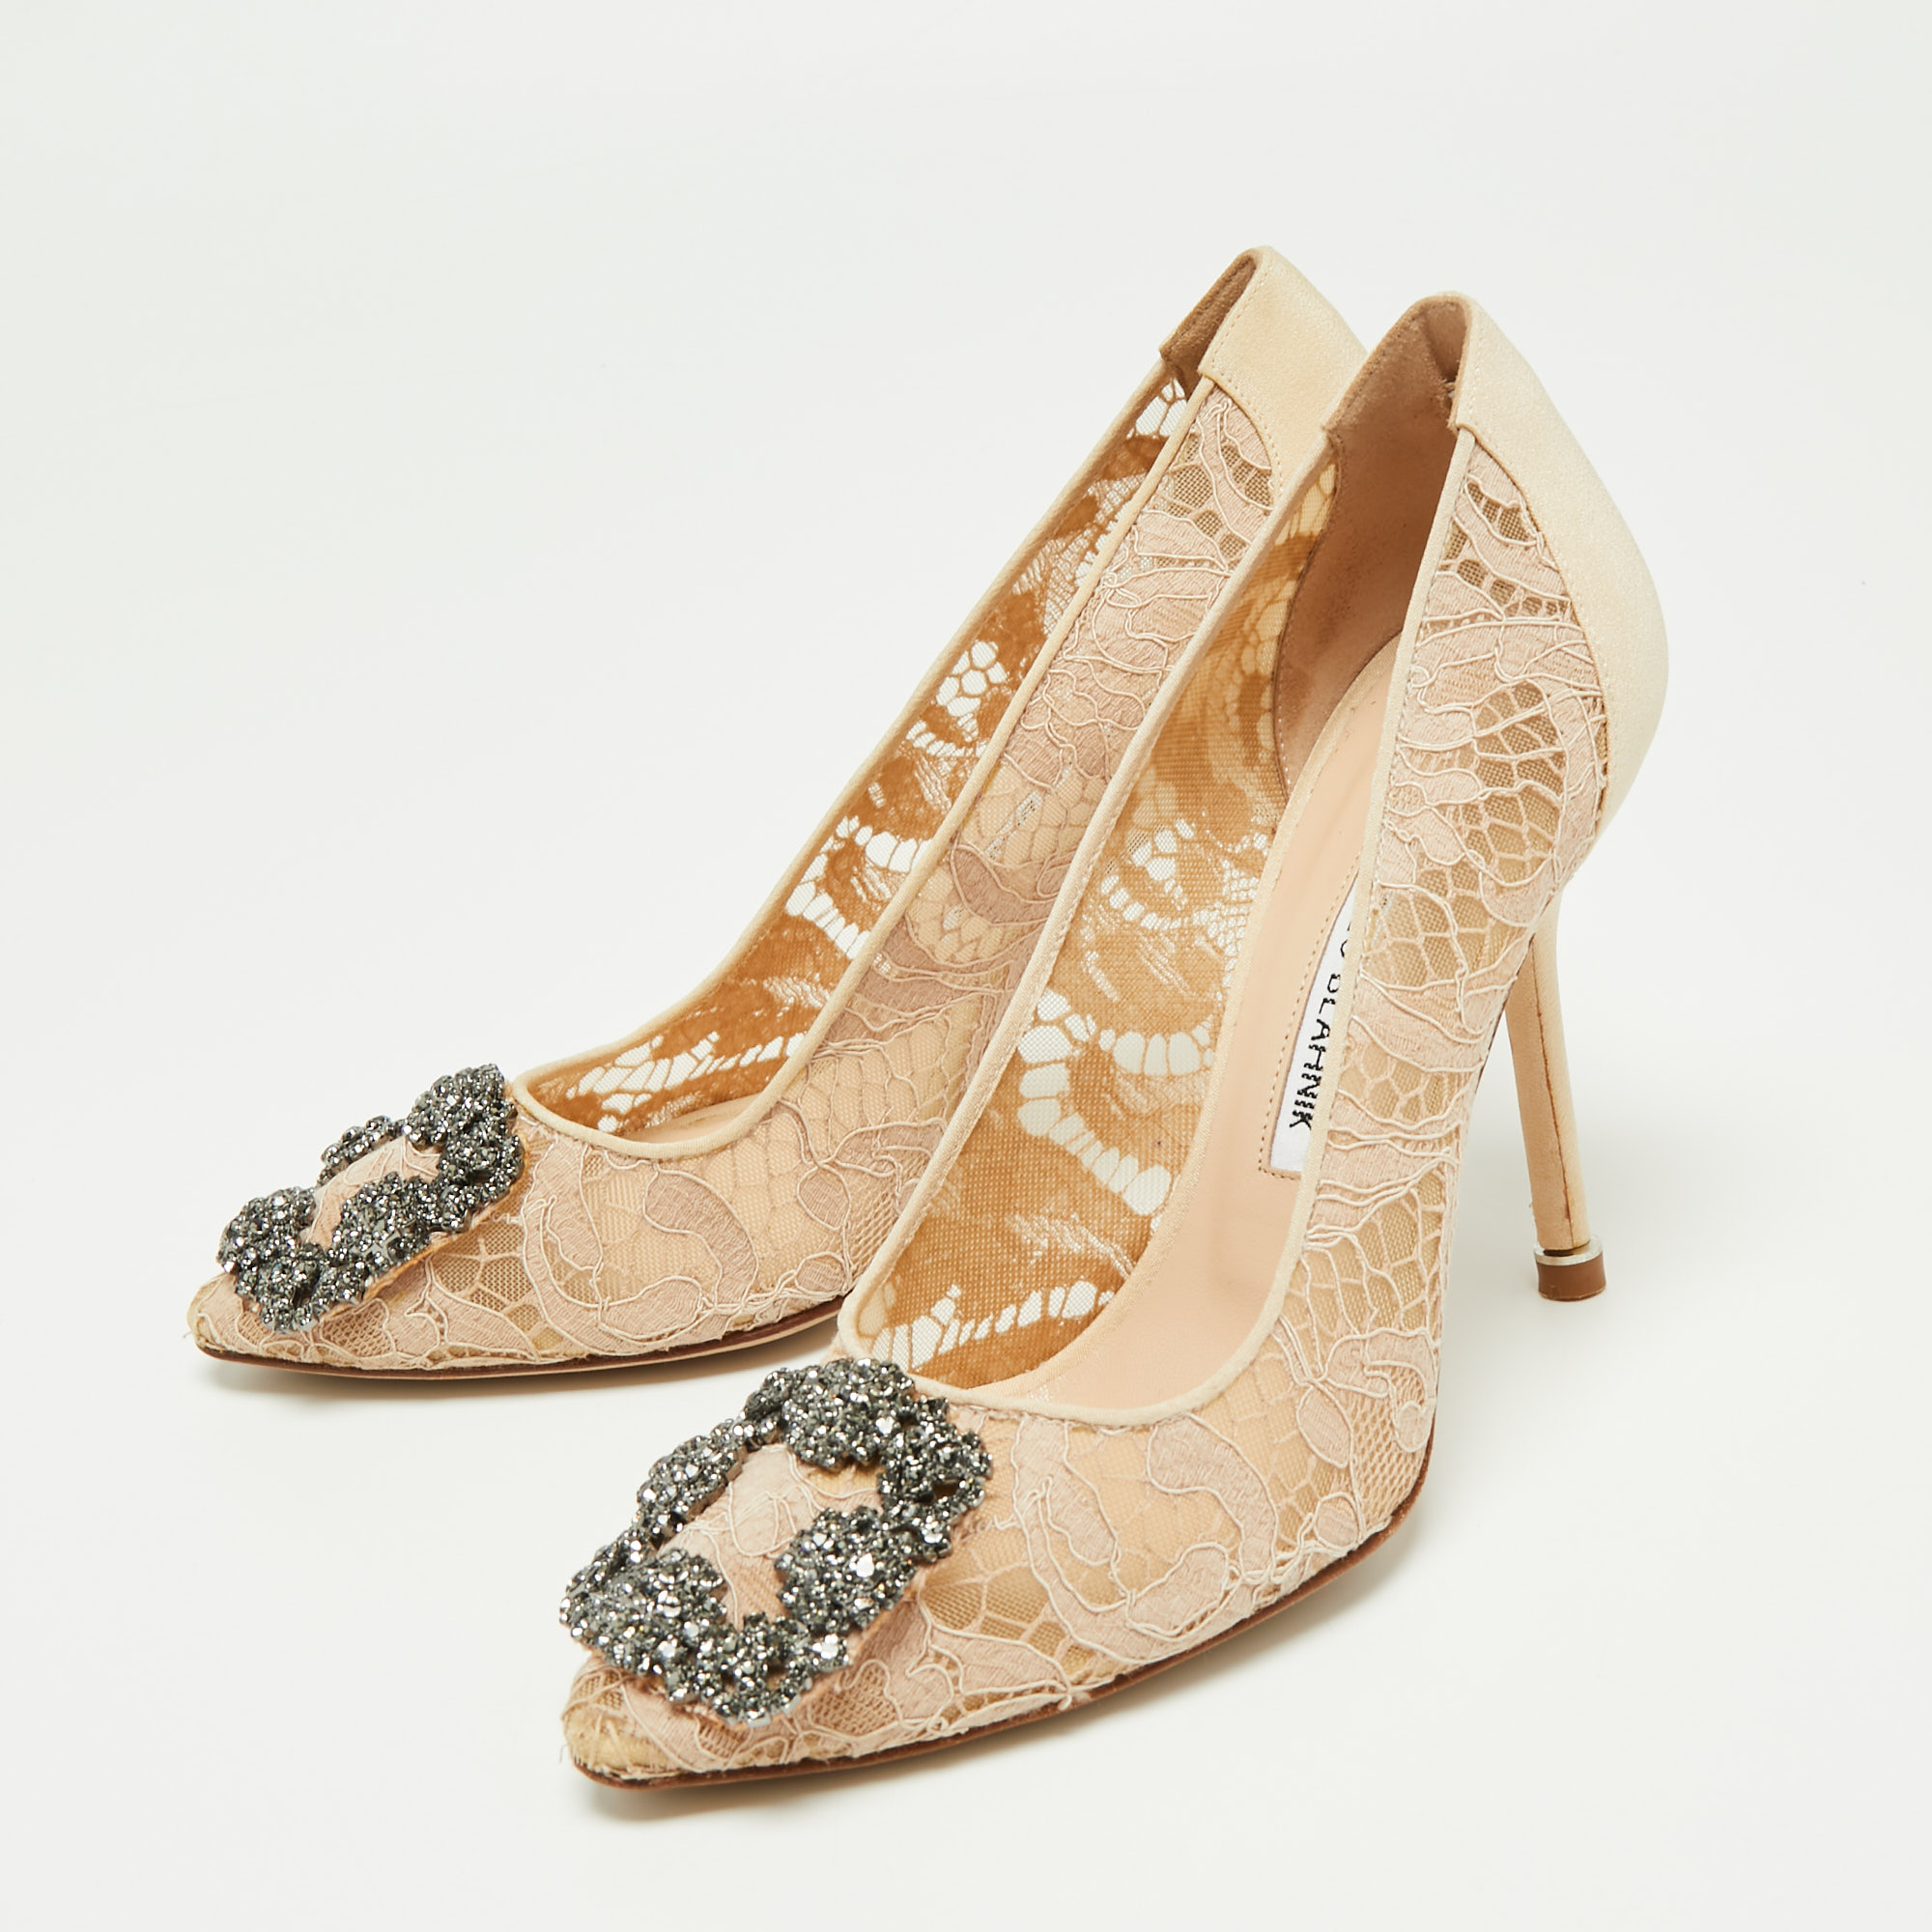 Manolo Blahnik Beige Lace Hangisi Pumps Size 36.5  - buy with discount